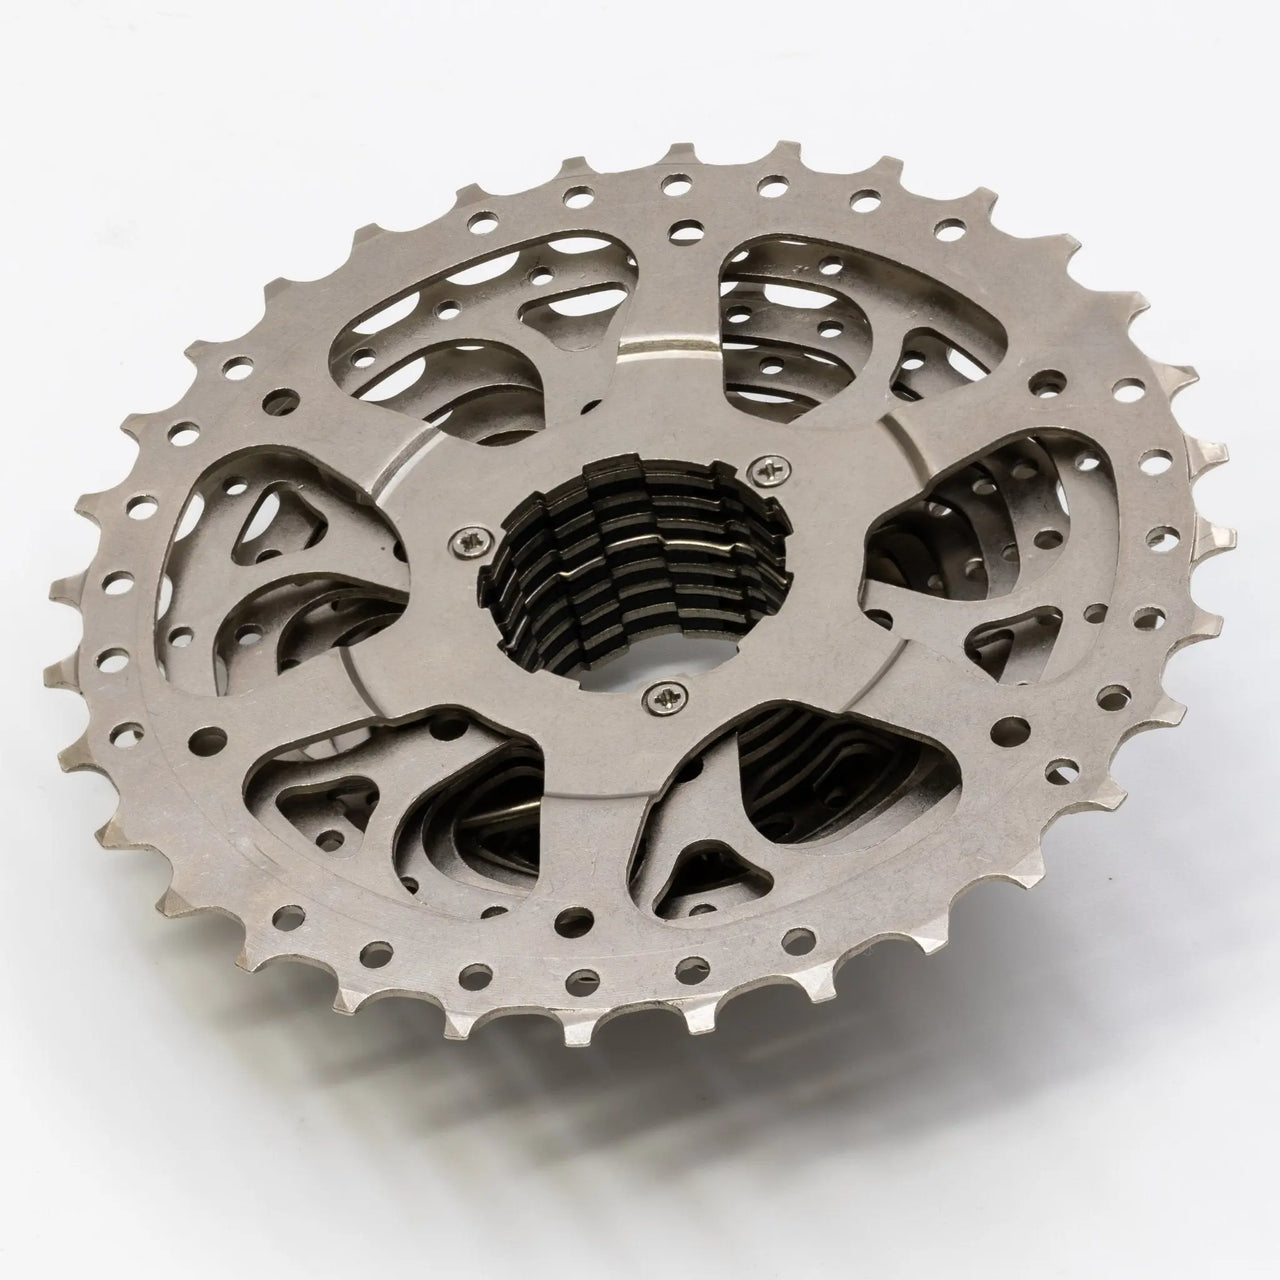 11 Speed 11-30T Cassette Road fits Shimano/Sram AirBike UK - Air BikeBicycle Cassettes & Freewheels